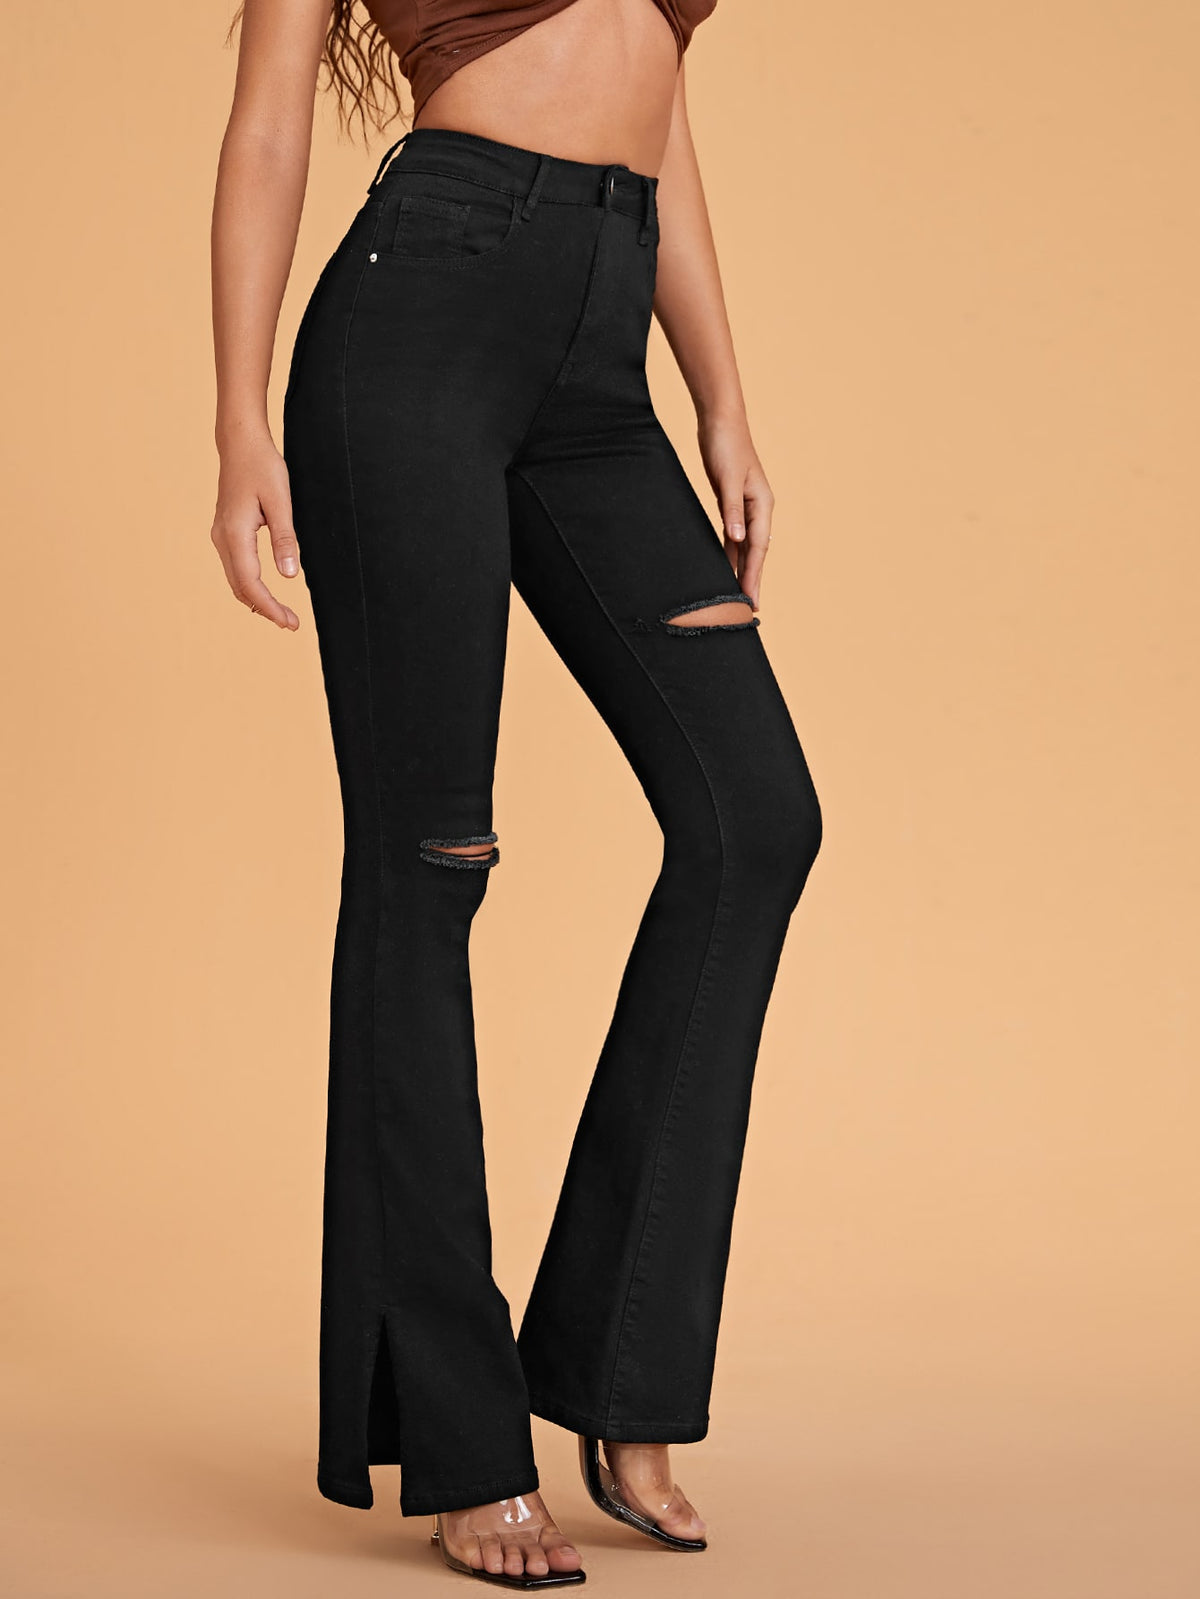 Ripped Flare Leg Jeans with High Waist - Black / L